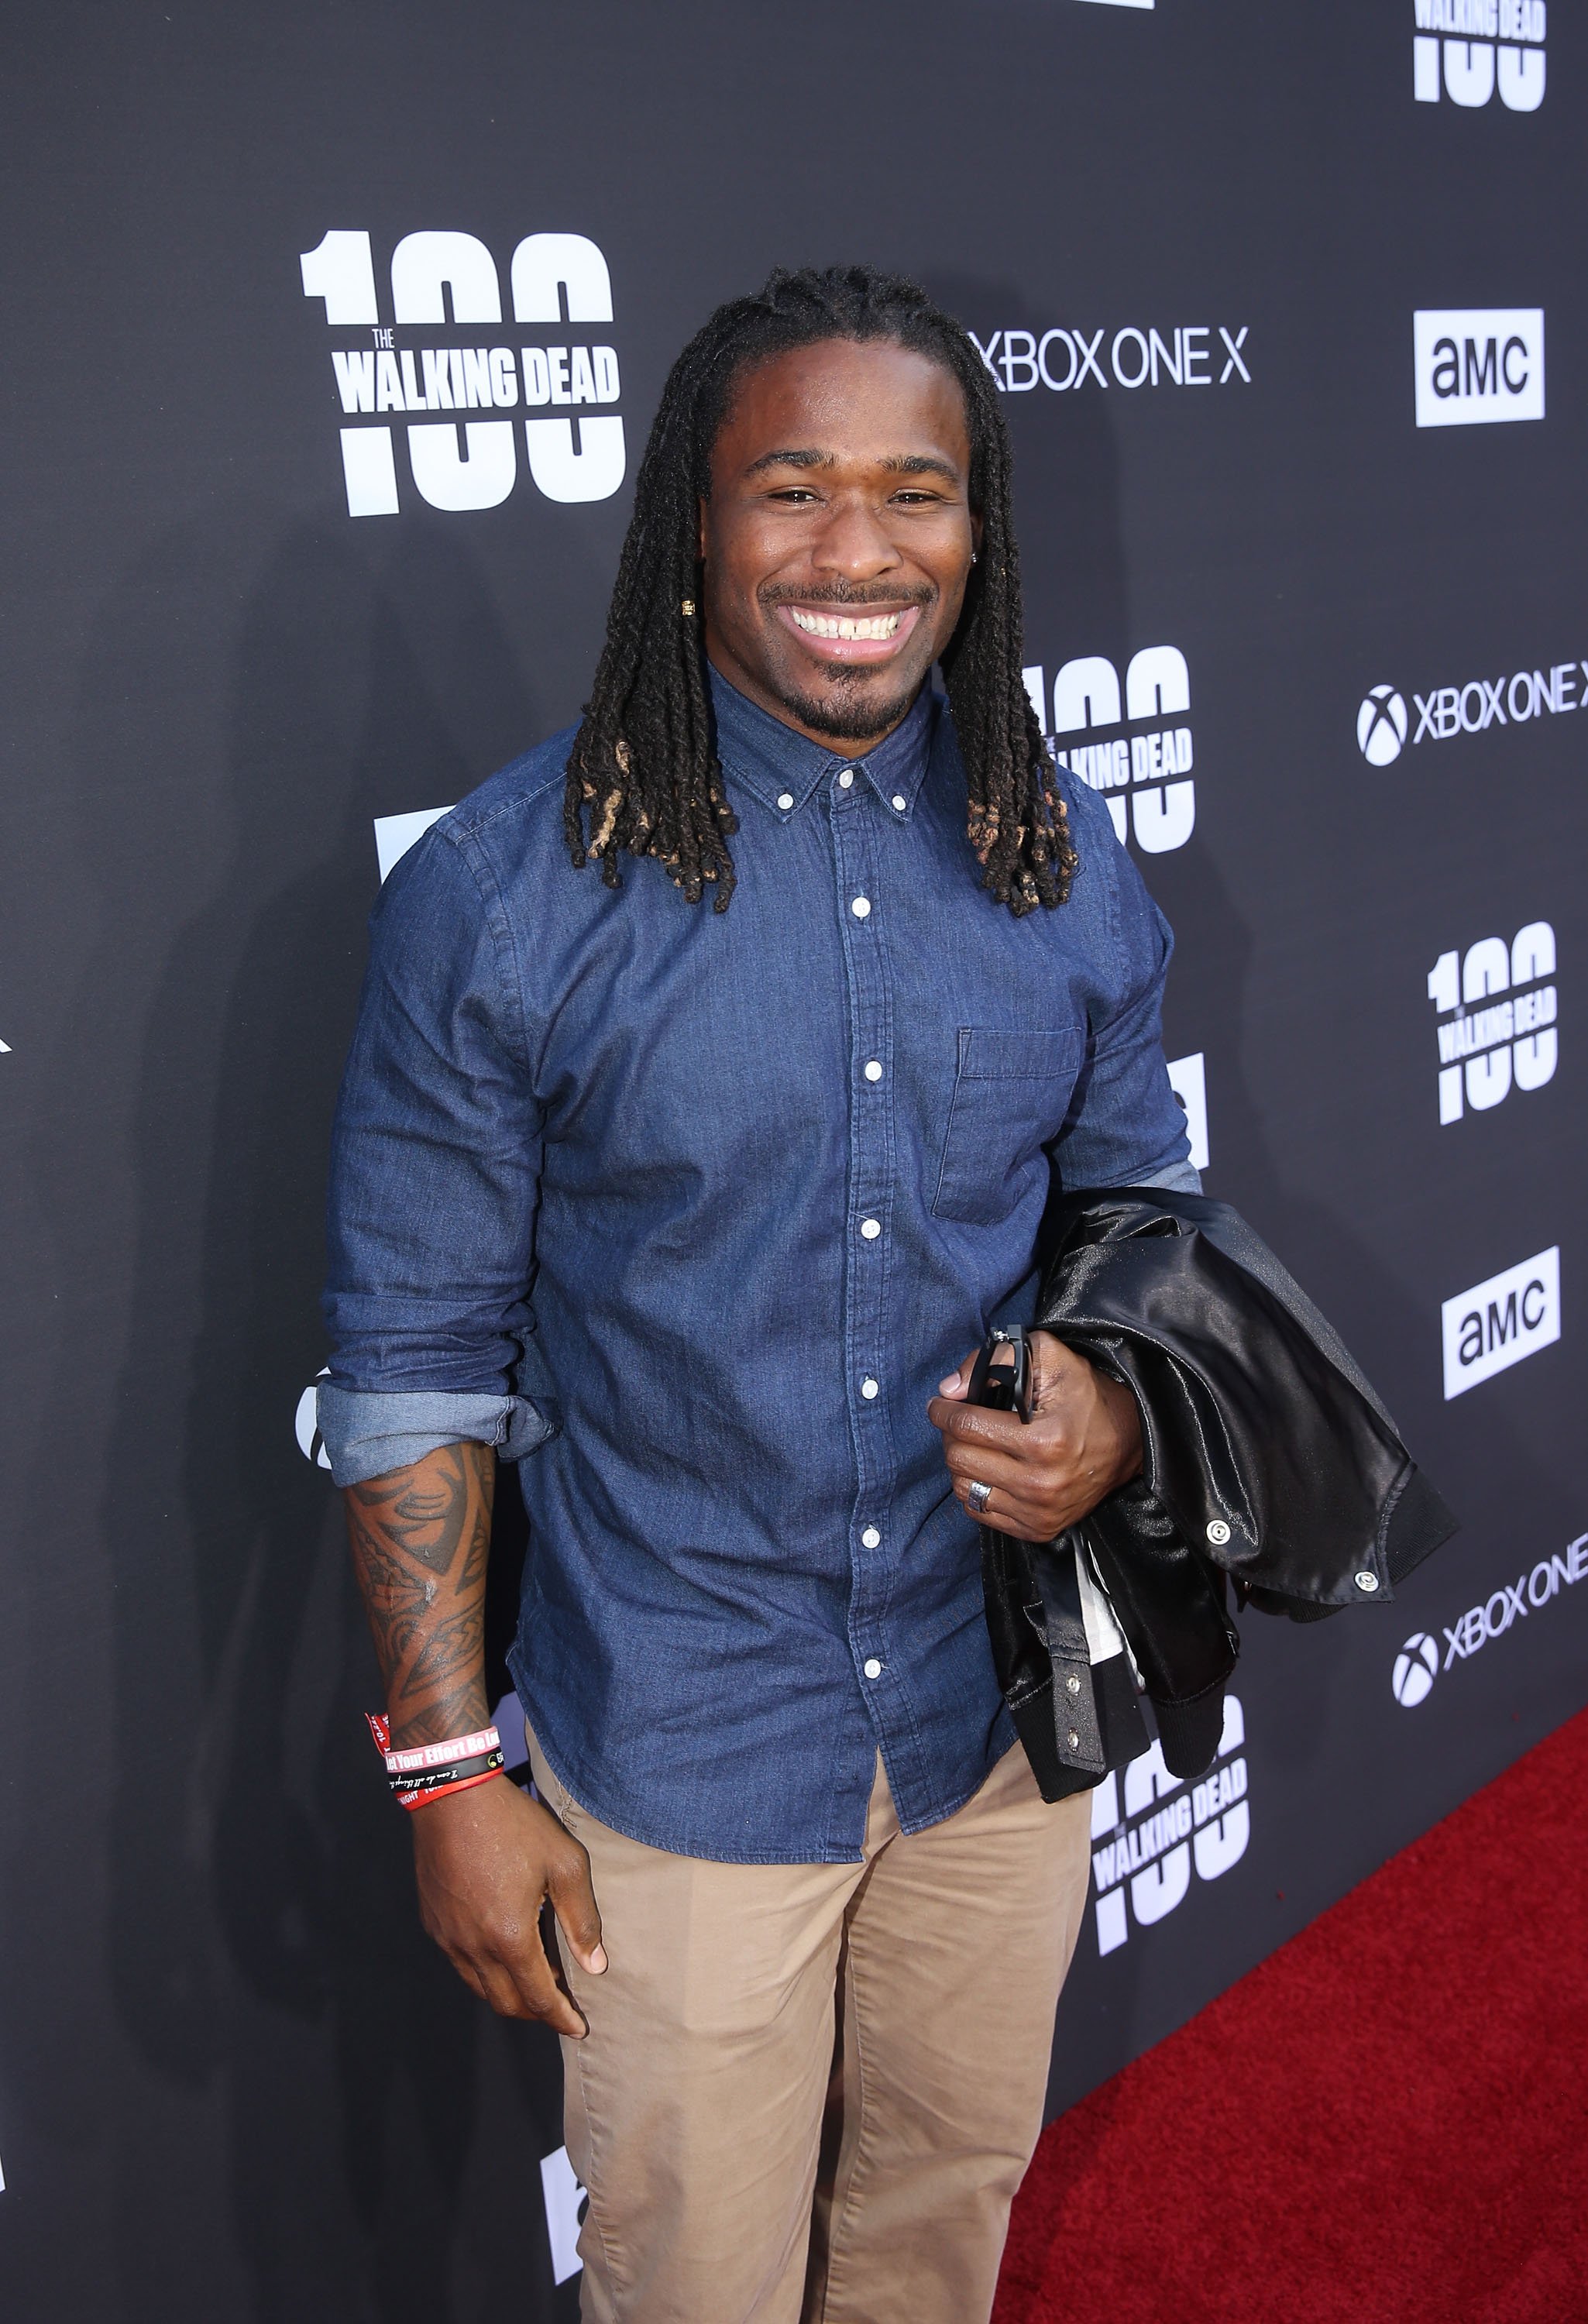 DeAngelo Williams at The Walking Dead 100th Episode Premiere in 2017. | Source: Getty Images